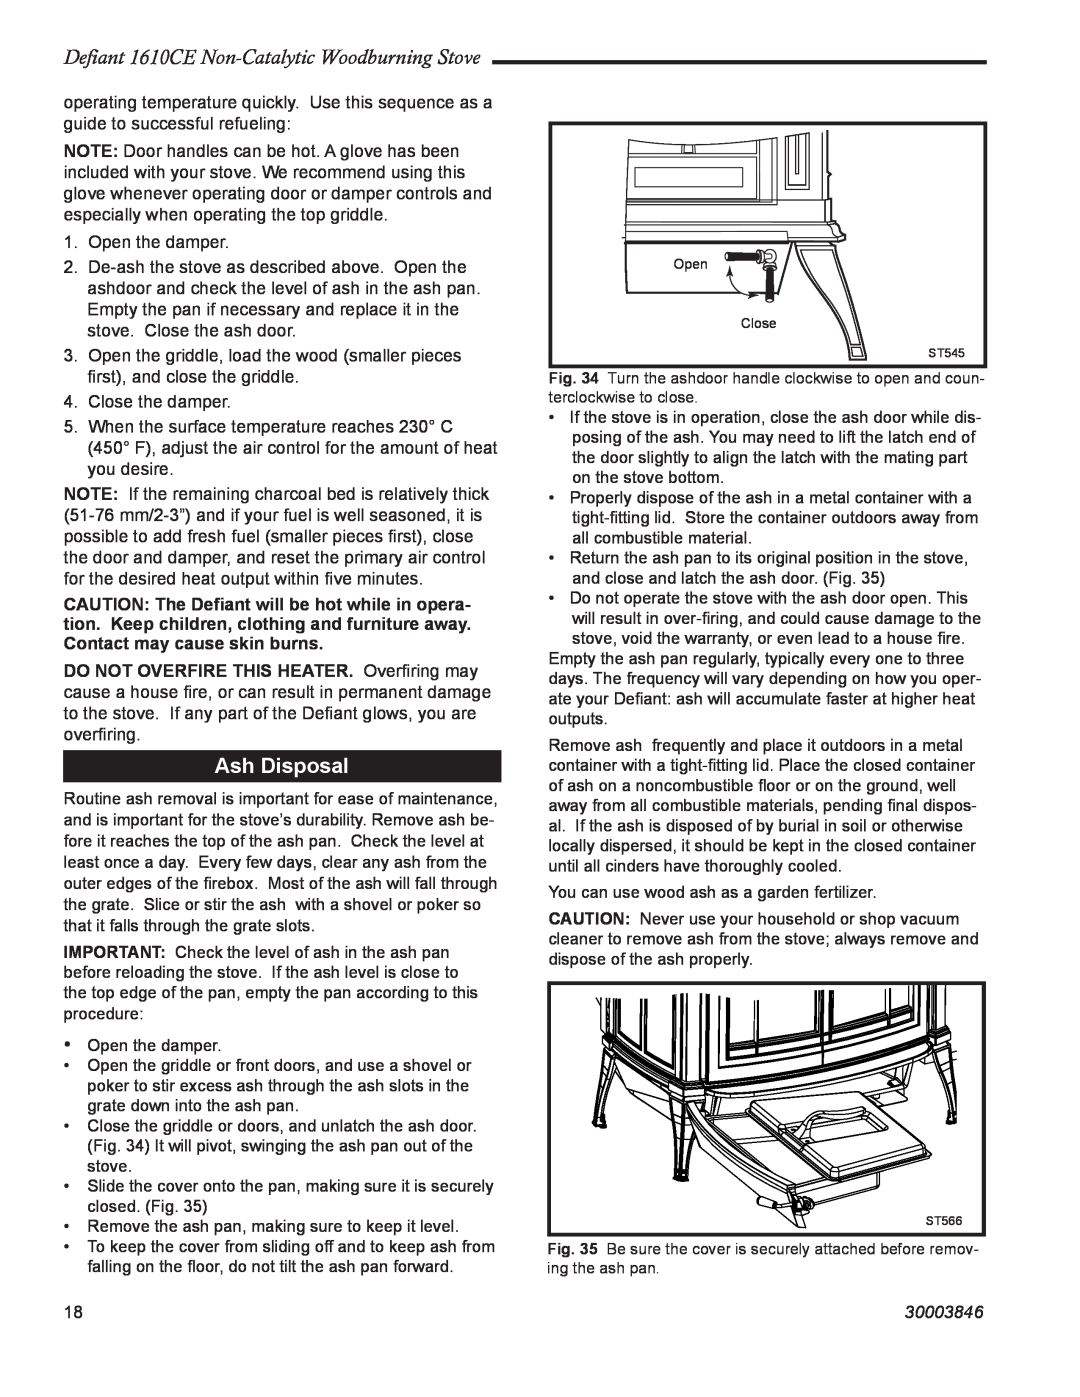 Vermont Casting installation instructions Ash Disposal, Defiant 1610CE Non-CatalyticWoodburning Stove, 30003846 